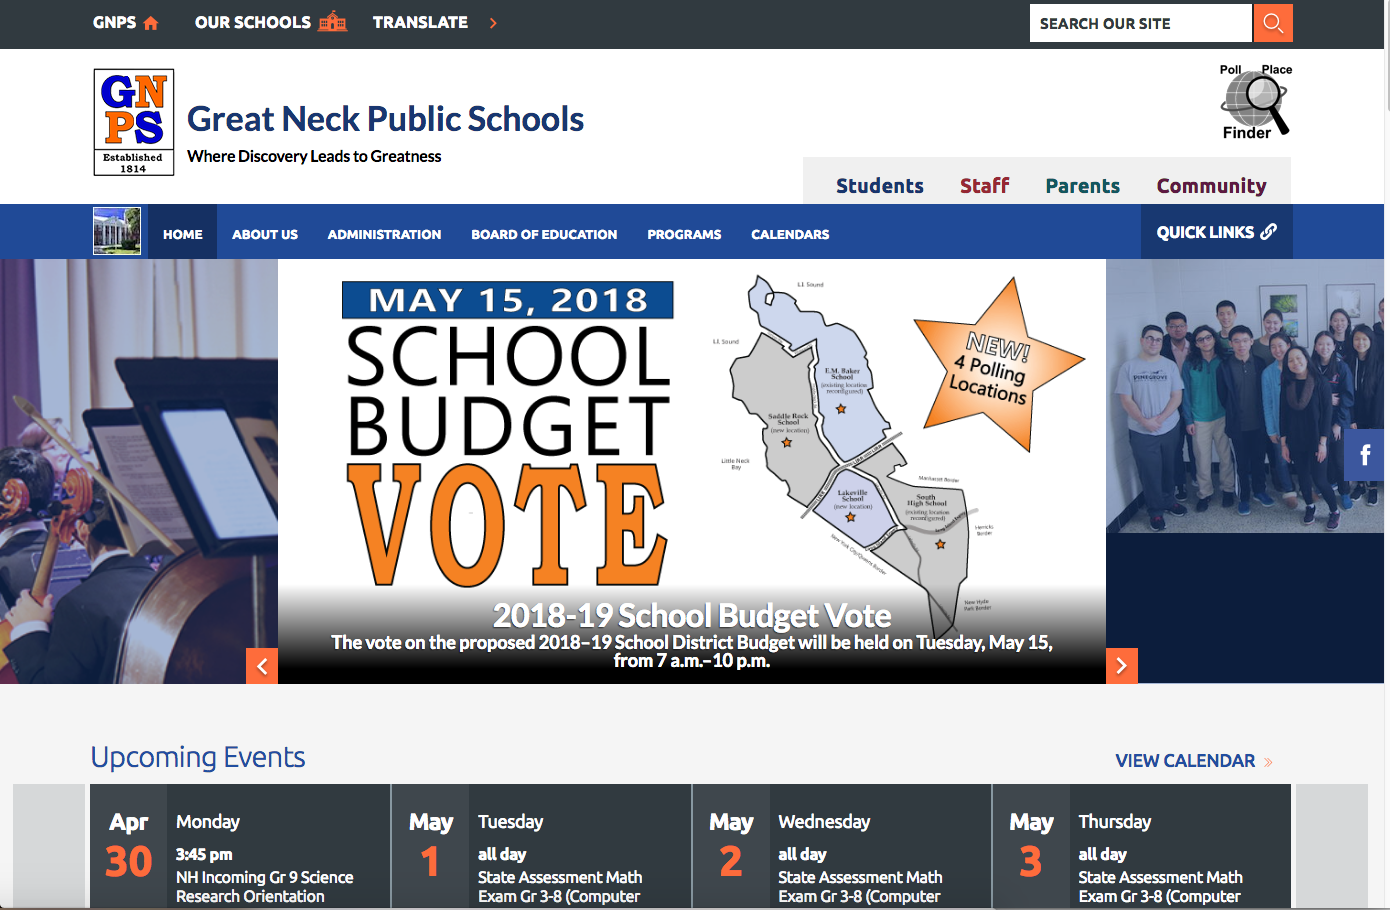 The Great Neck school district website, as seen at 10:52 a.m., underwent a major makeover for its 20th anniversary. (Screenshot by Janelle Clausen)